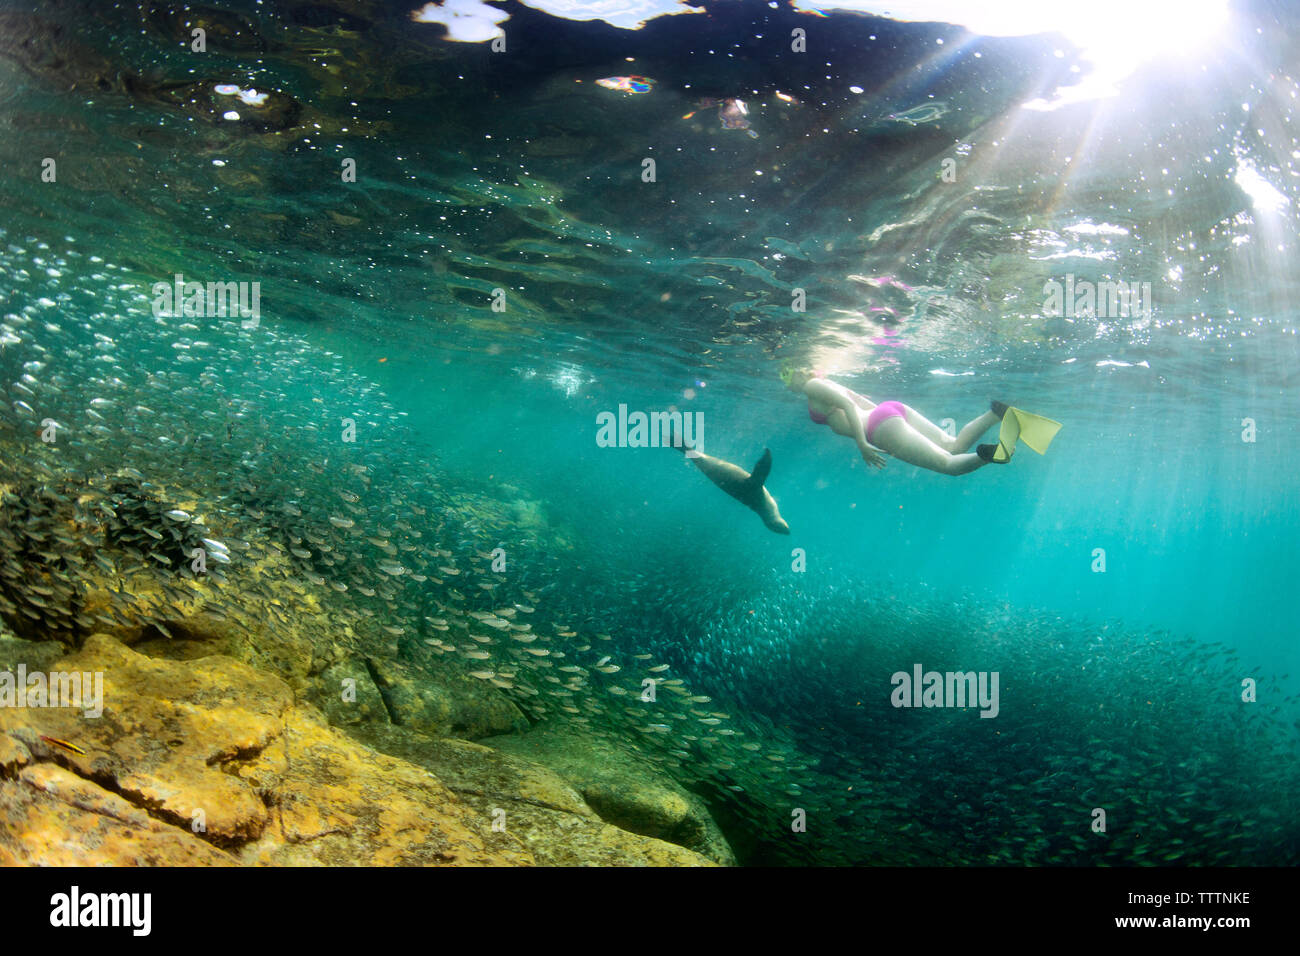 Woman swimming by fishes under water Stock Photo